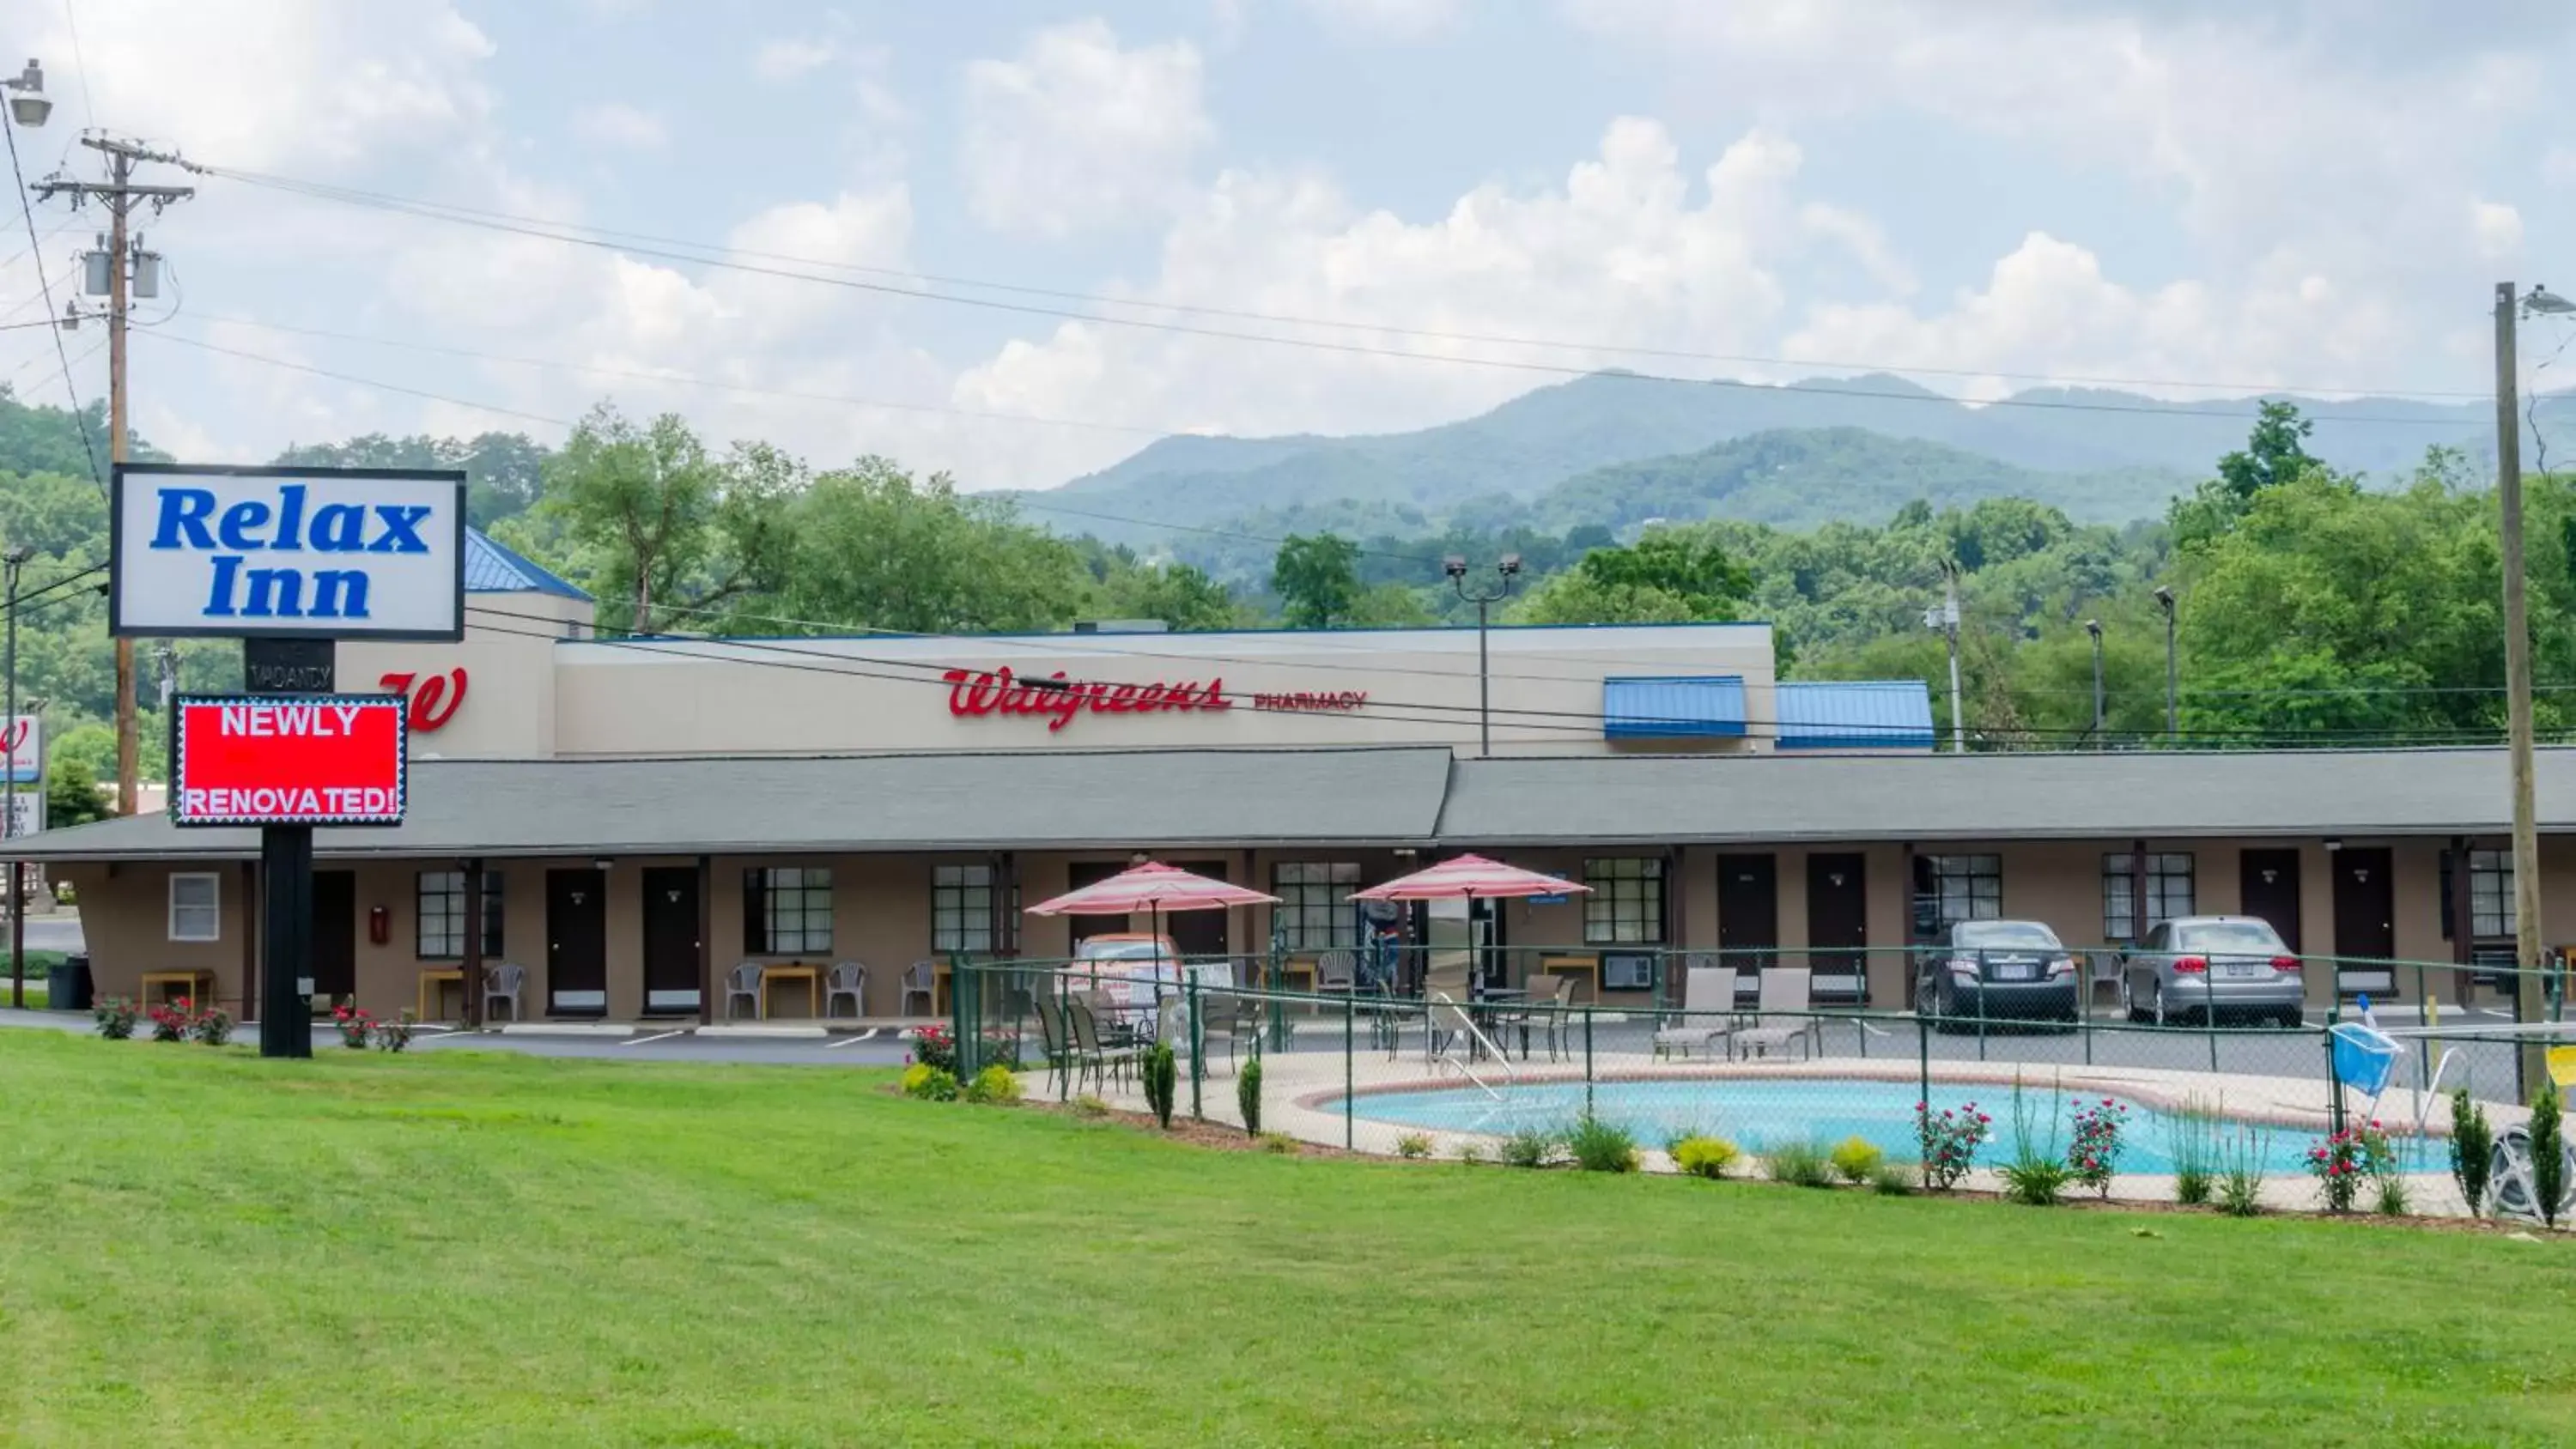 Property Building in Relax Inn - Bryson City